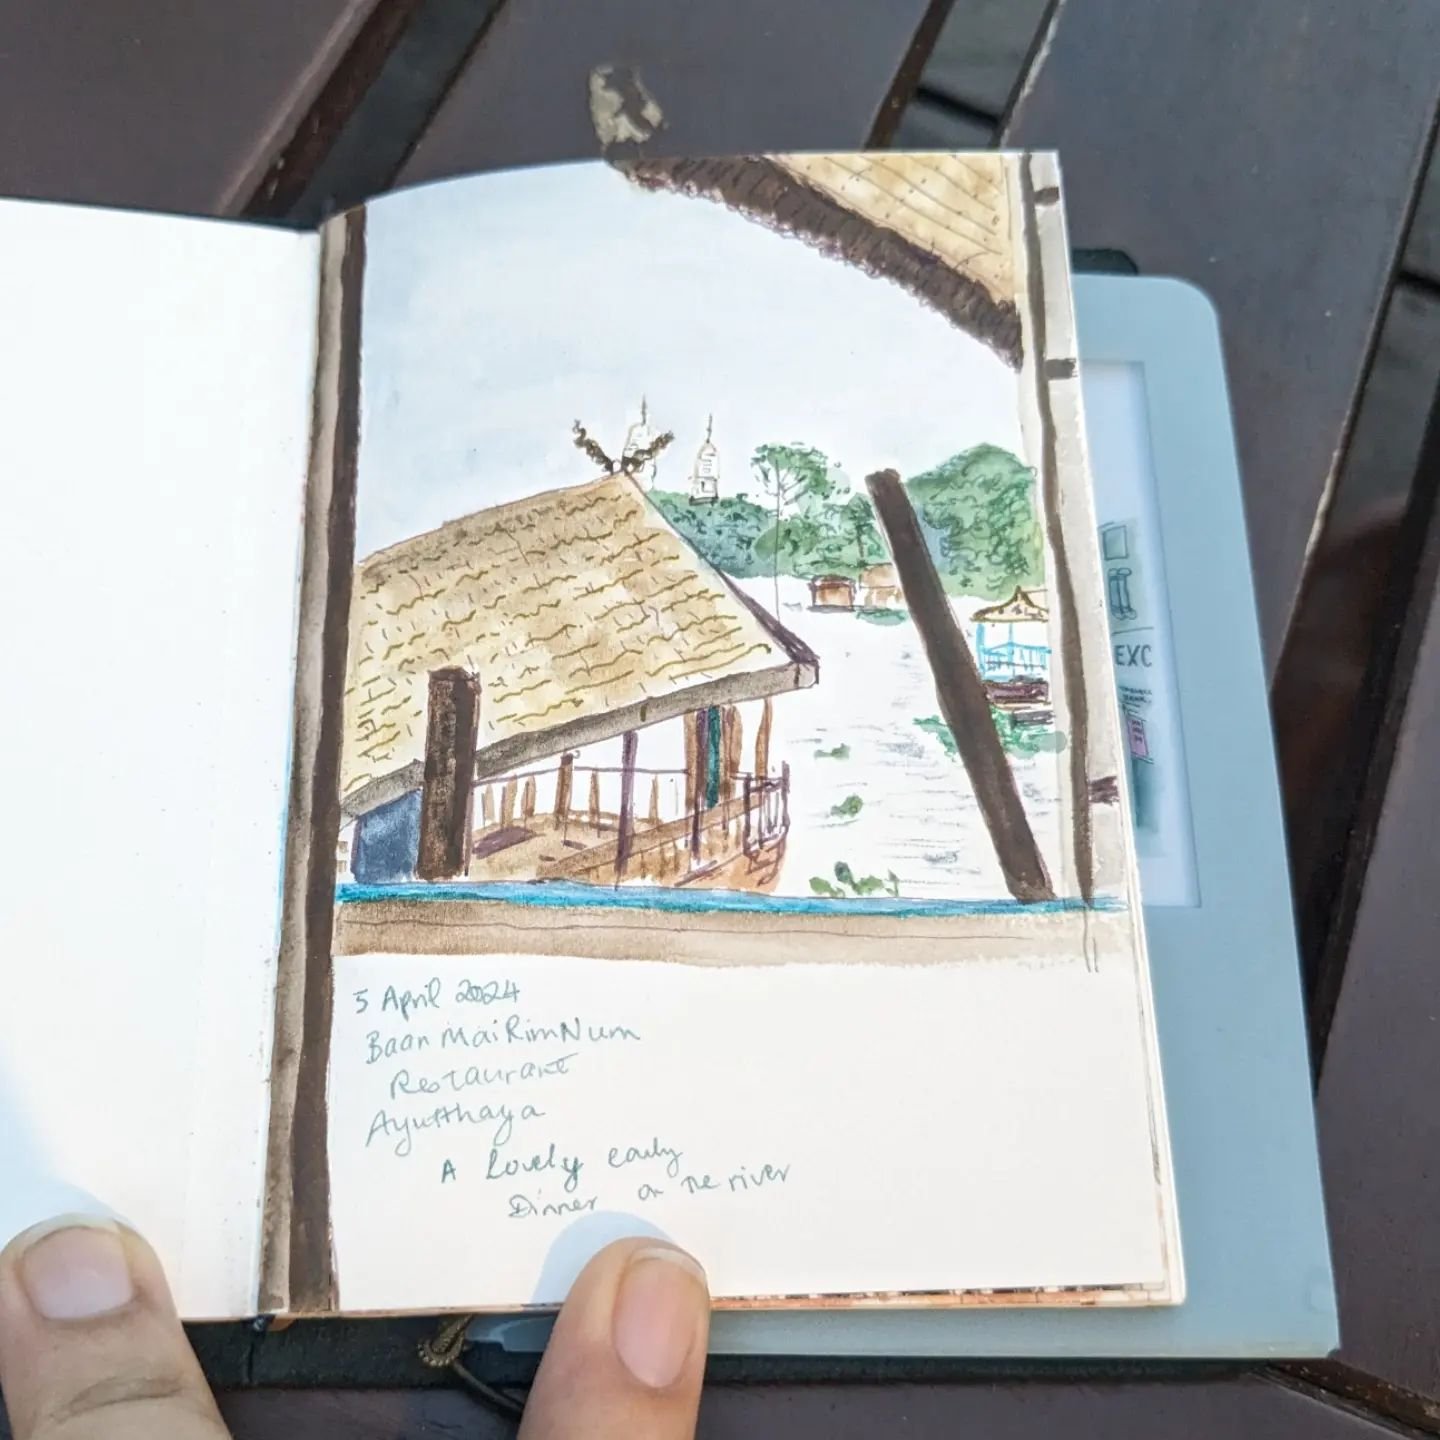 Super quick sketch #pleinair while waiting for dinner on the 5th of April in Ayutthaya, and painted later in the evening back at the accommodation. The perspective is a bit off, but I'm still pretty happy with it ☺️. This was done on #travellerscompa